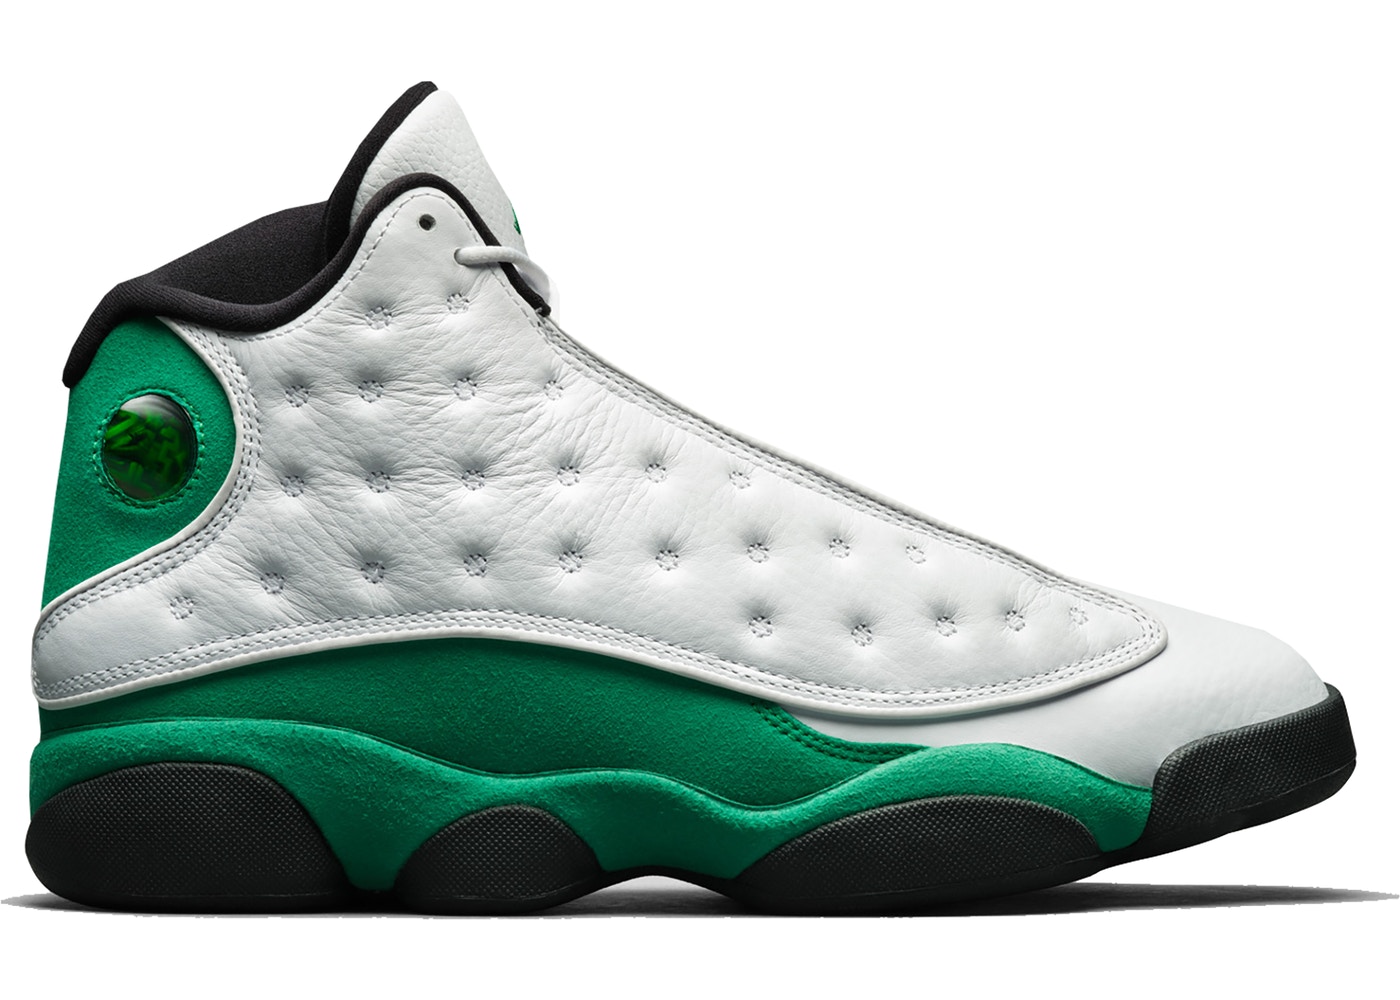 Air Jordan 13 Retro 'Lucky Green' - Store List and Review - The Ventric